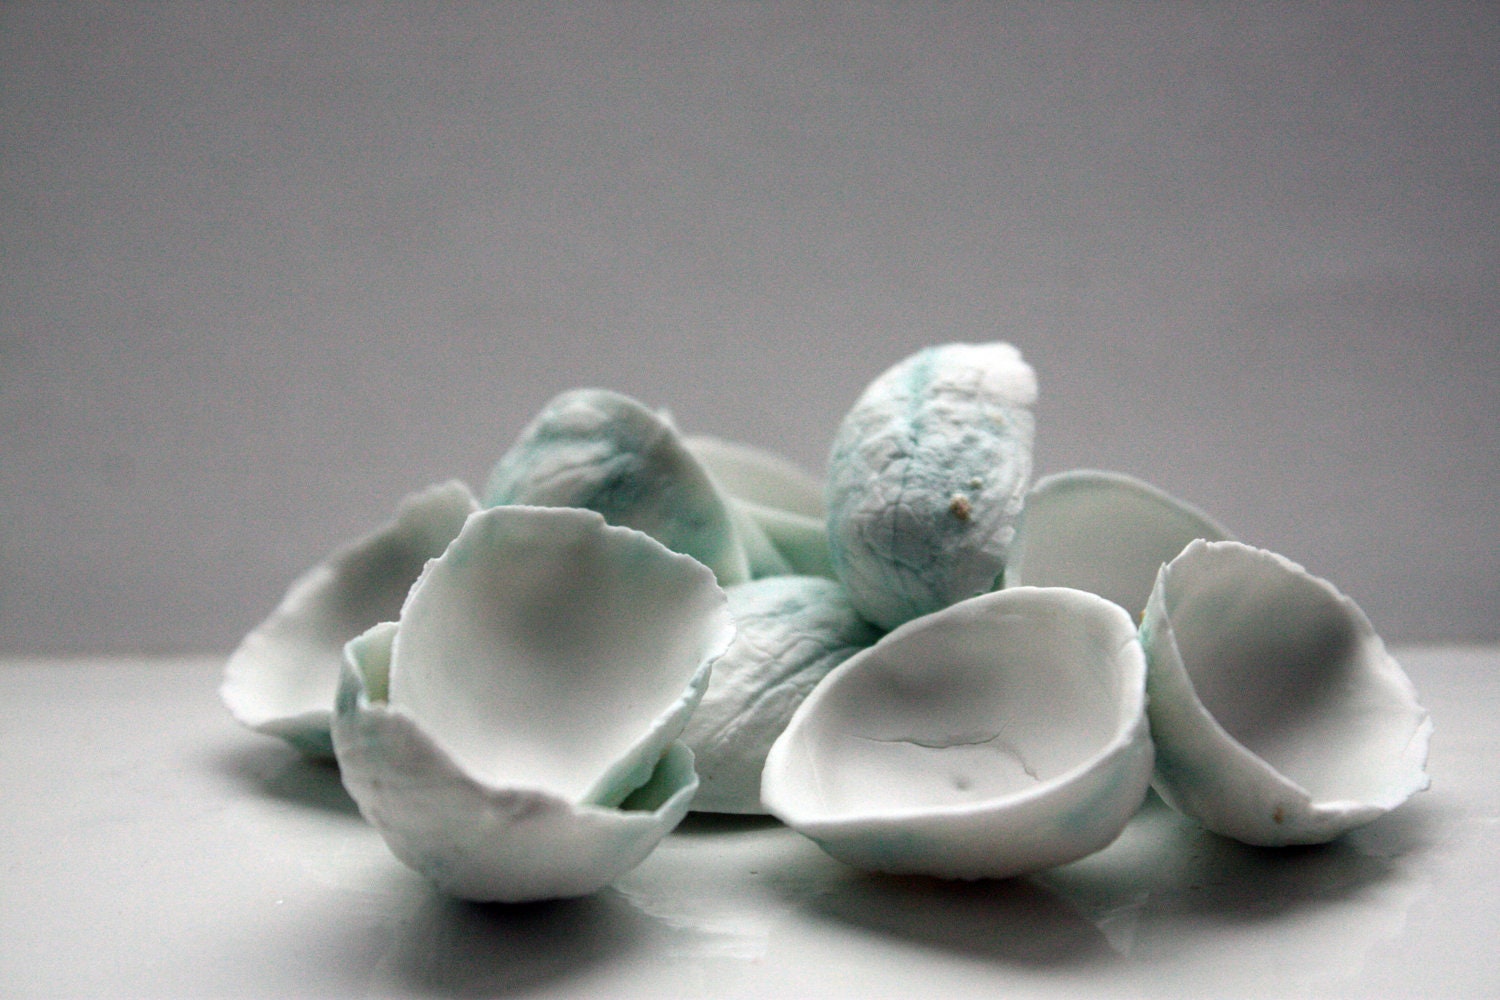 Walnut shells from stonewareng English fine bone china and copper oxide in teal color - madebymanos